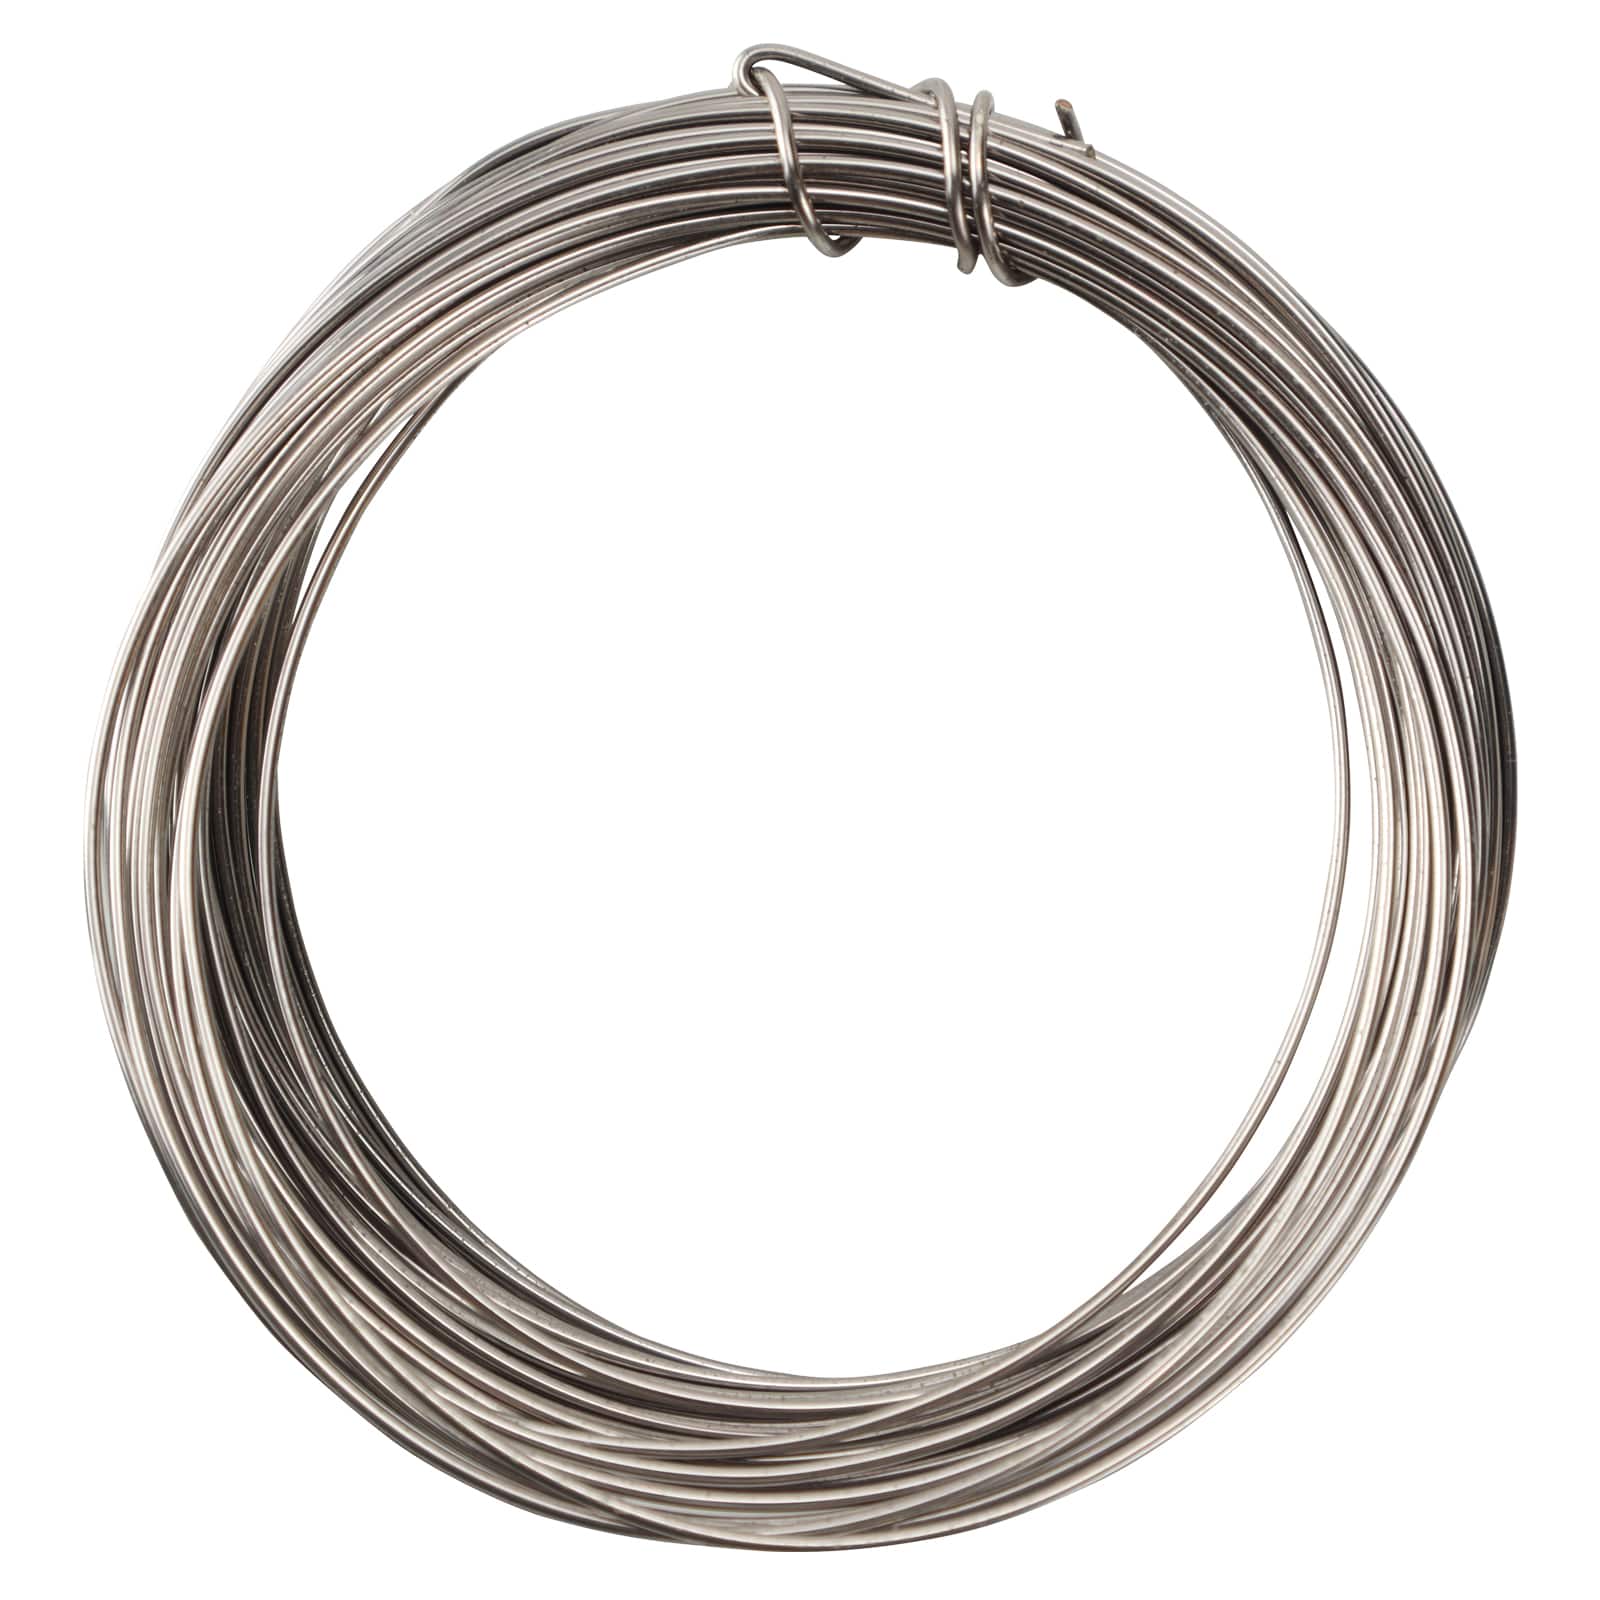 Bead Landing Silver Plated Copper Wire, 28 Gauge, 12 ct | Michaels